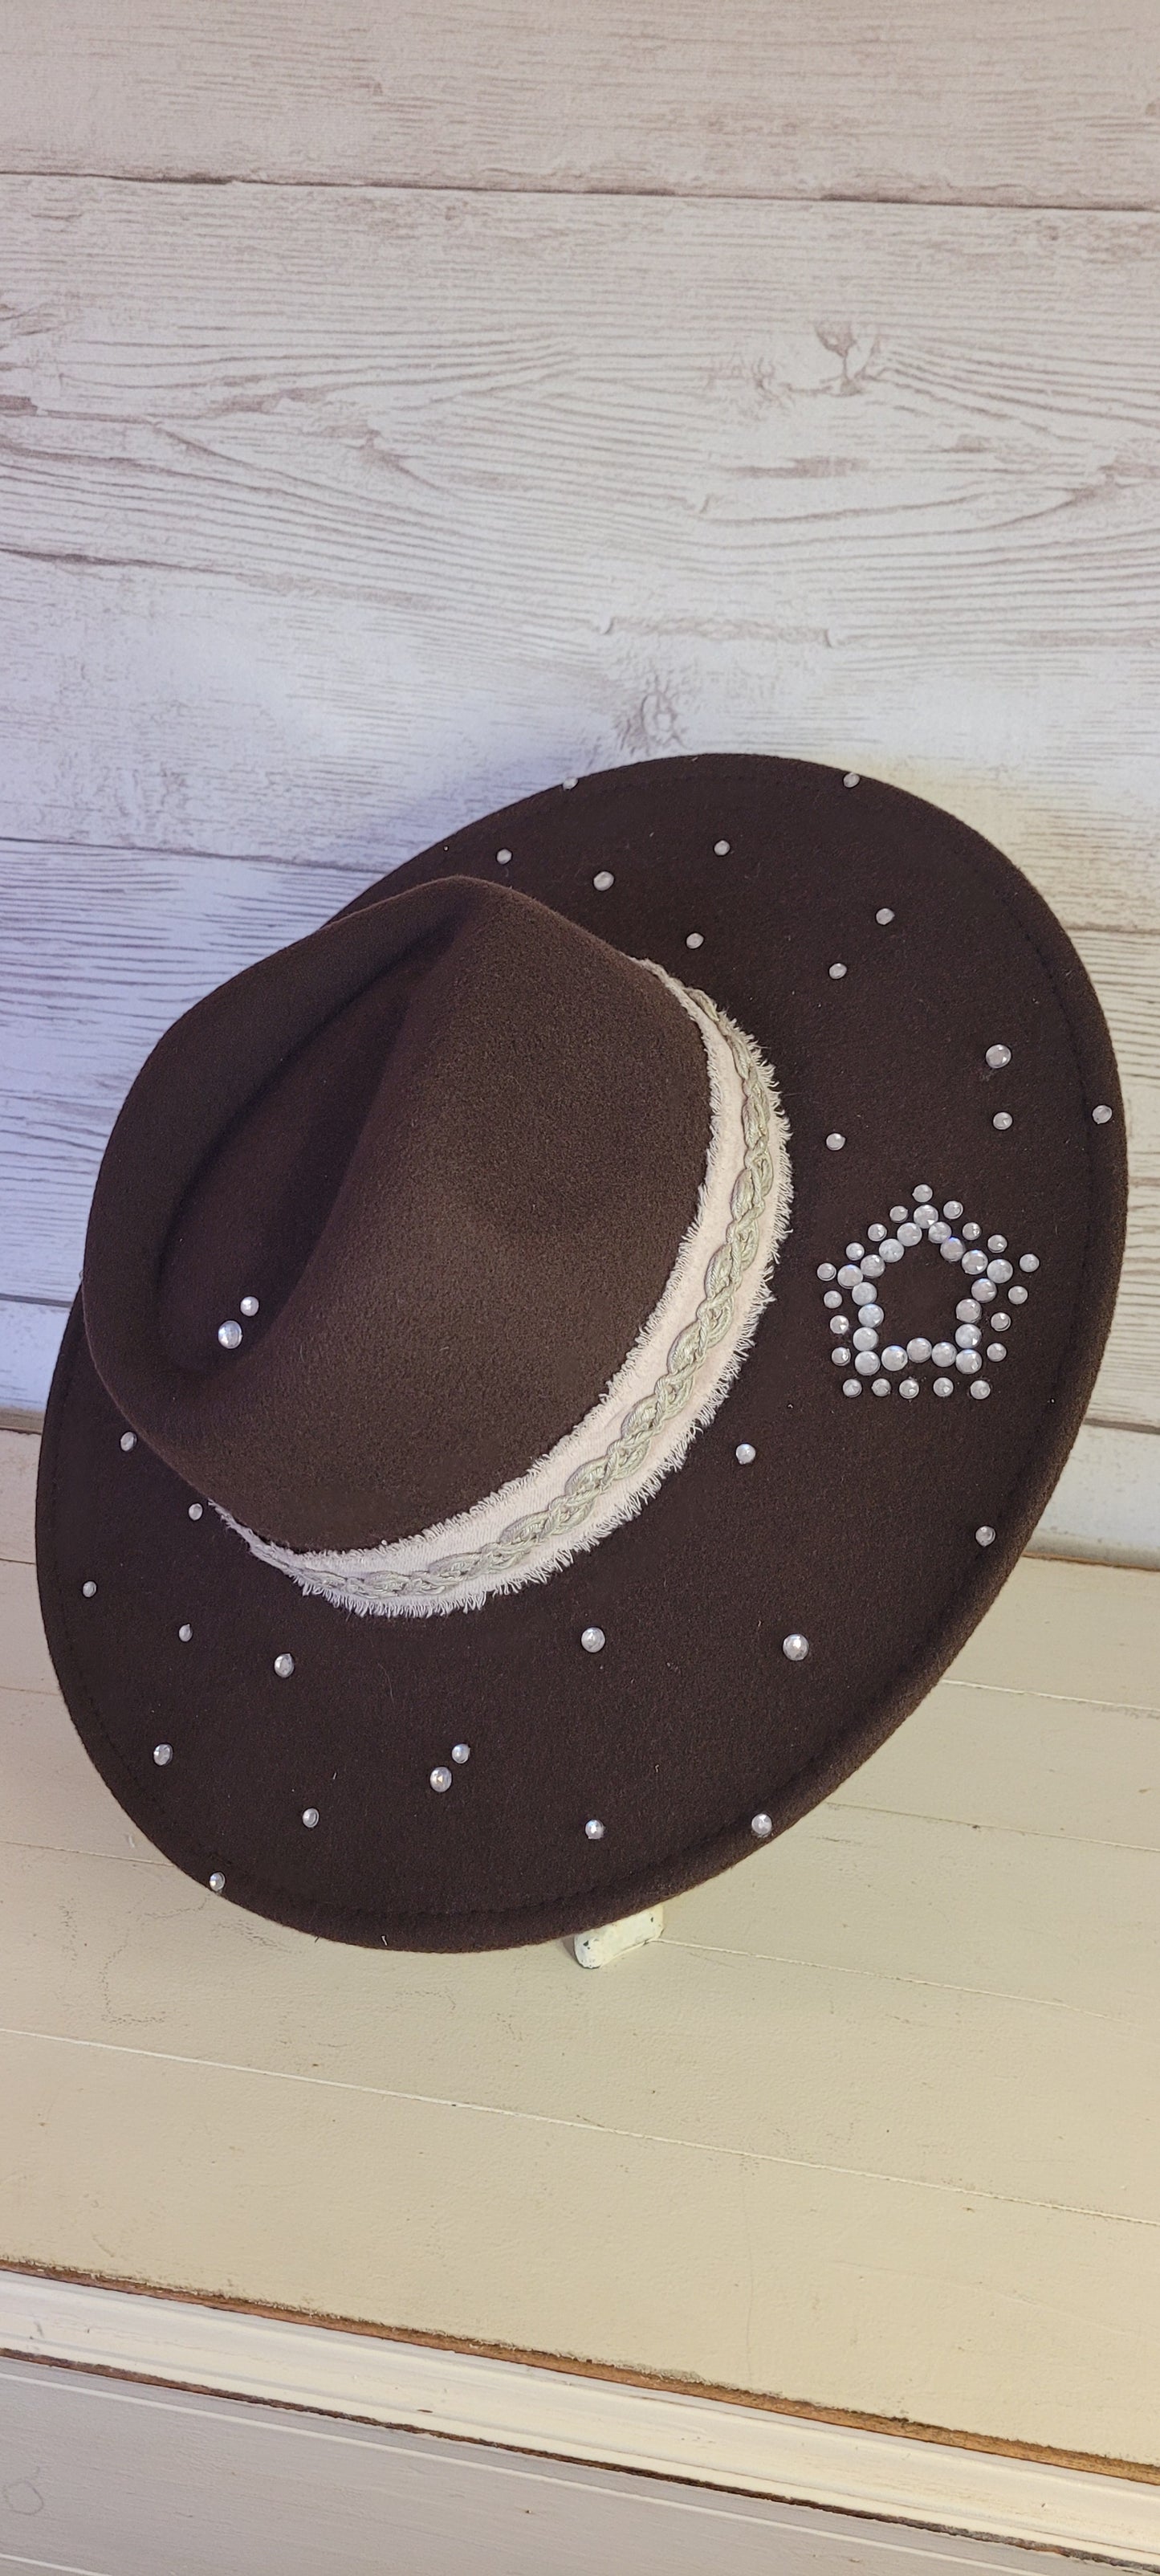 Features rhinestones, natural frayed velvet & lace ribbon, glitter star brooch & playing card Felt hat Flat brim 100% polyester Ribbon drawstring for hat size adjustment Head Circumference: 24" Crown Height: 5" Brim Length: 15.75" Brim Width: 14.5" Branded & numbered inside crown Custom designed by Kayla